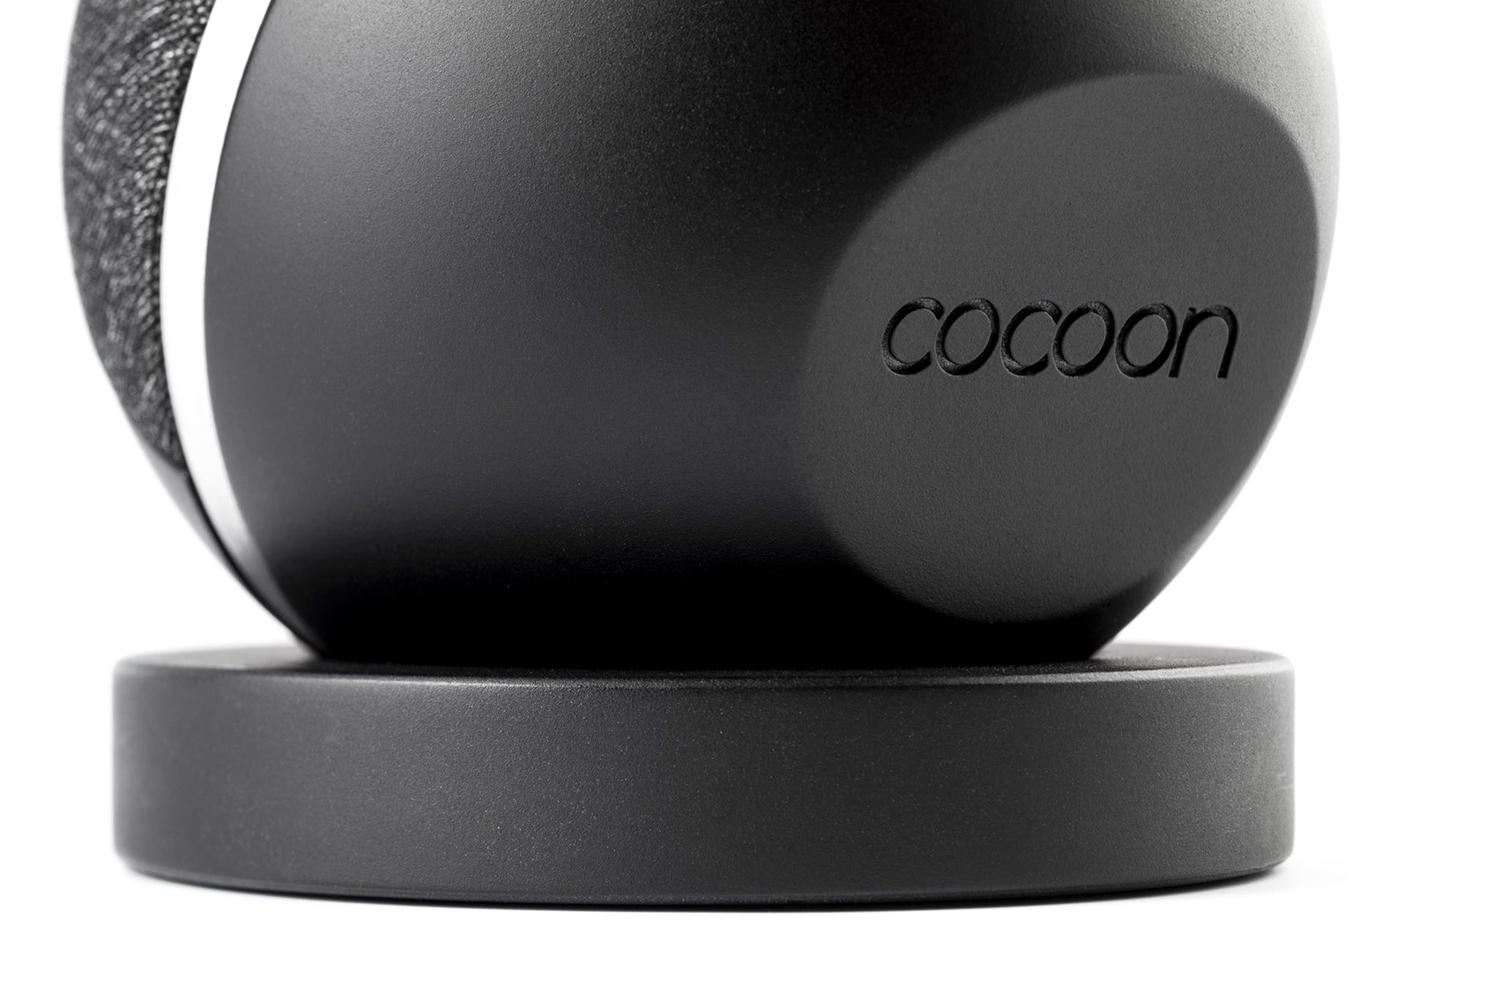 Cocoon security system